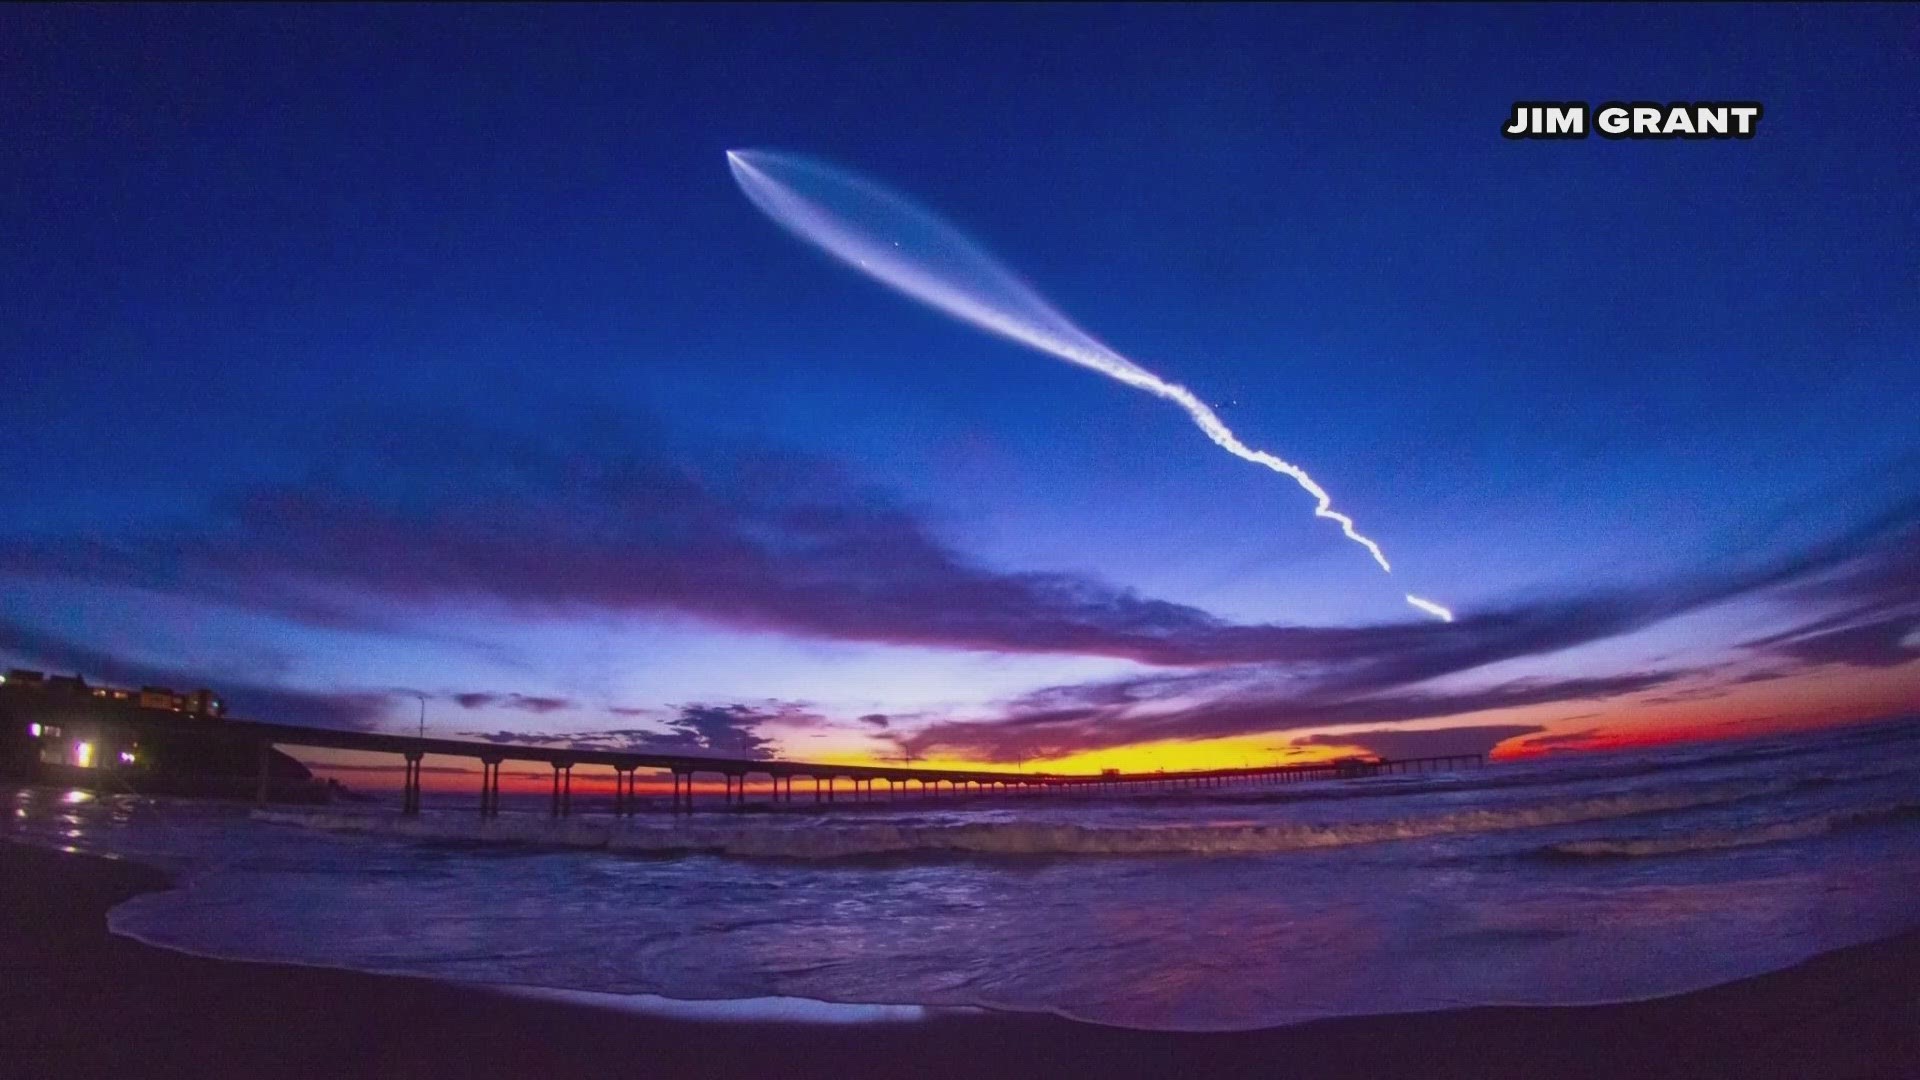 SpaceX has launched Falcon 9 rockets 310 times so far. The next one taking off from Vandenberg is scheduled for April 9.